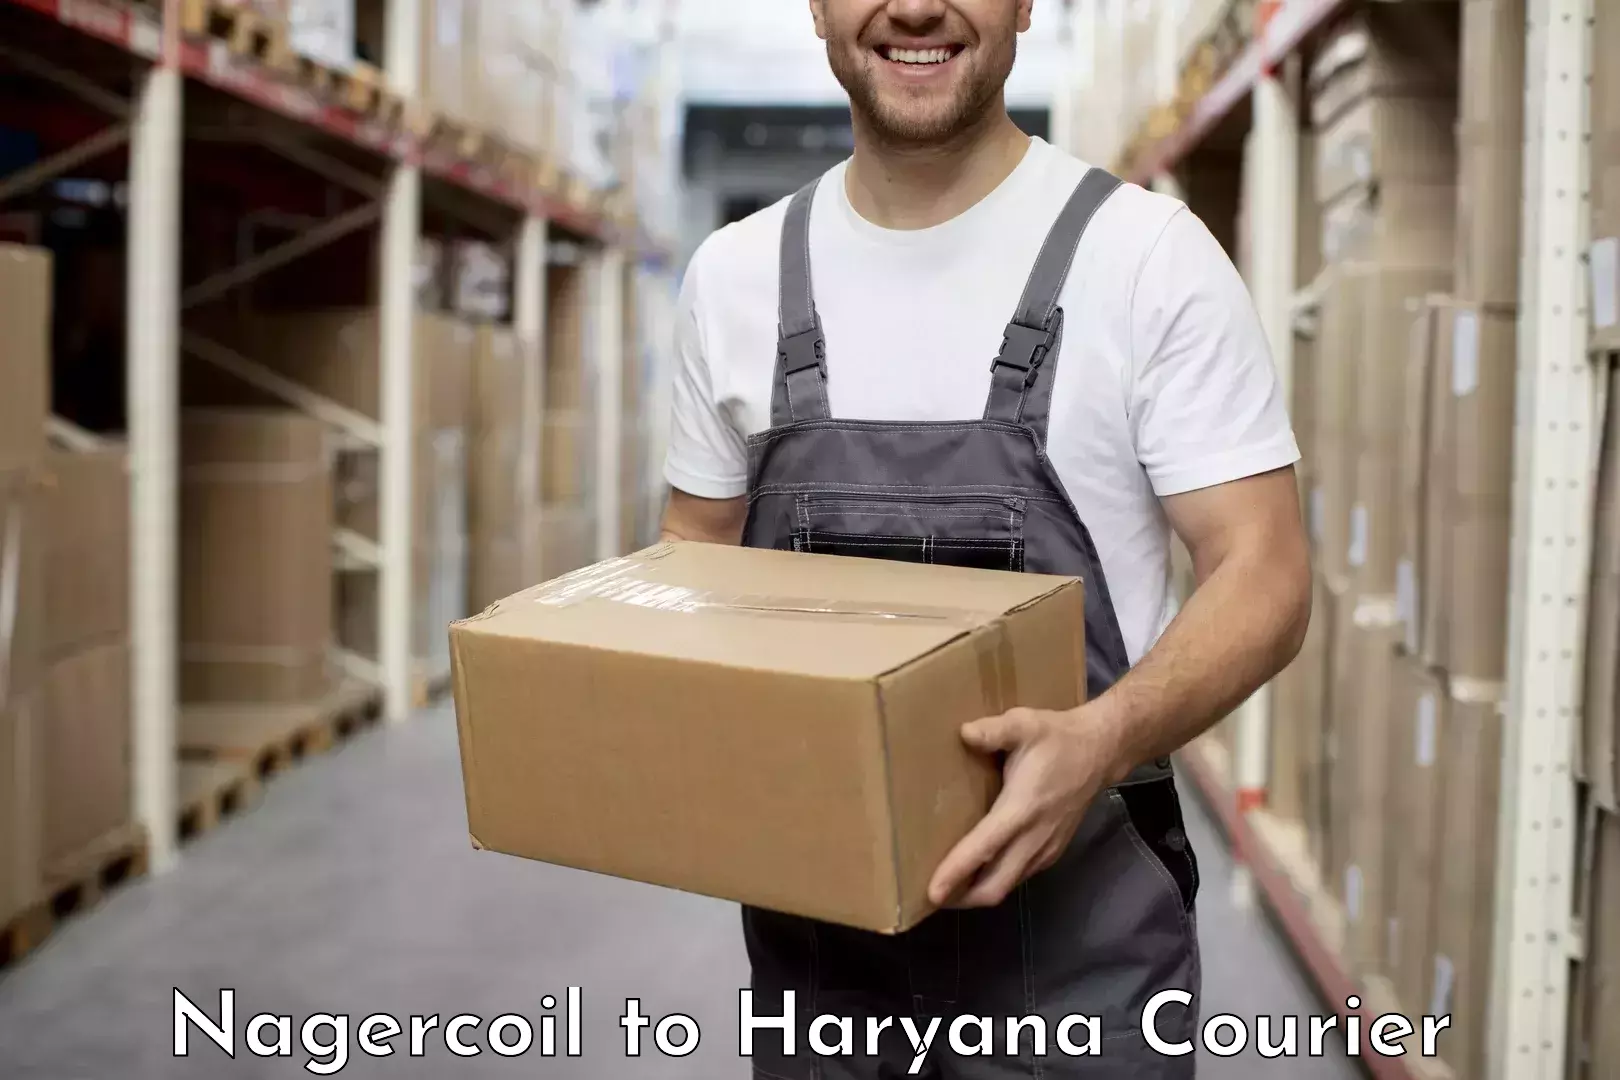 Sustainable shipping practices Nagercoil to Gurgaon